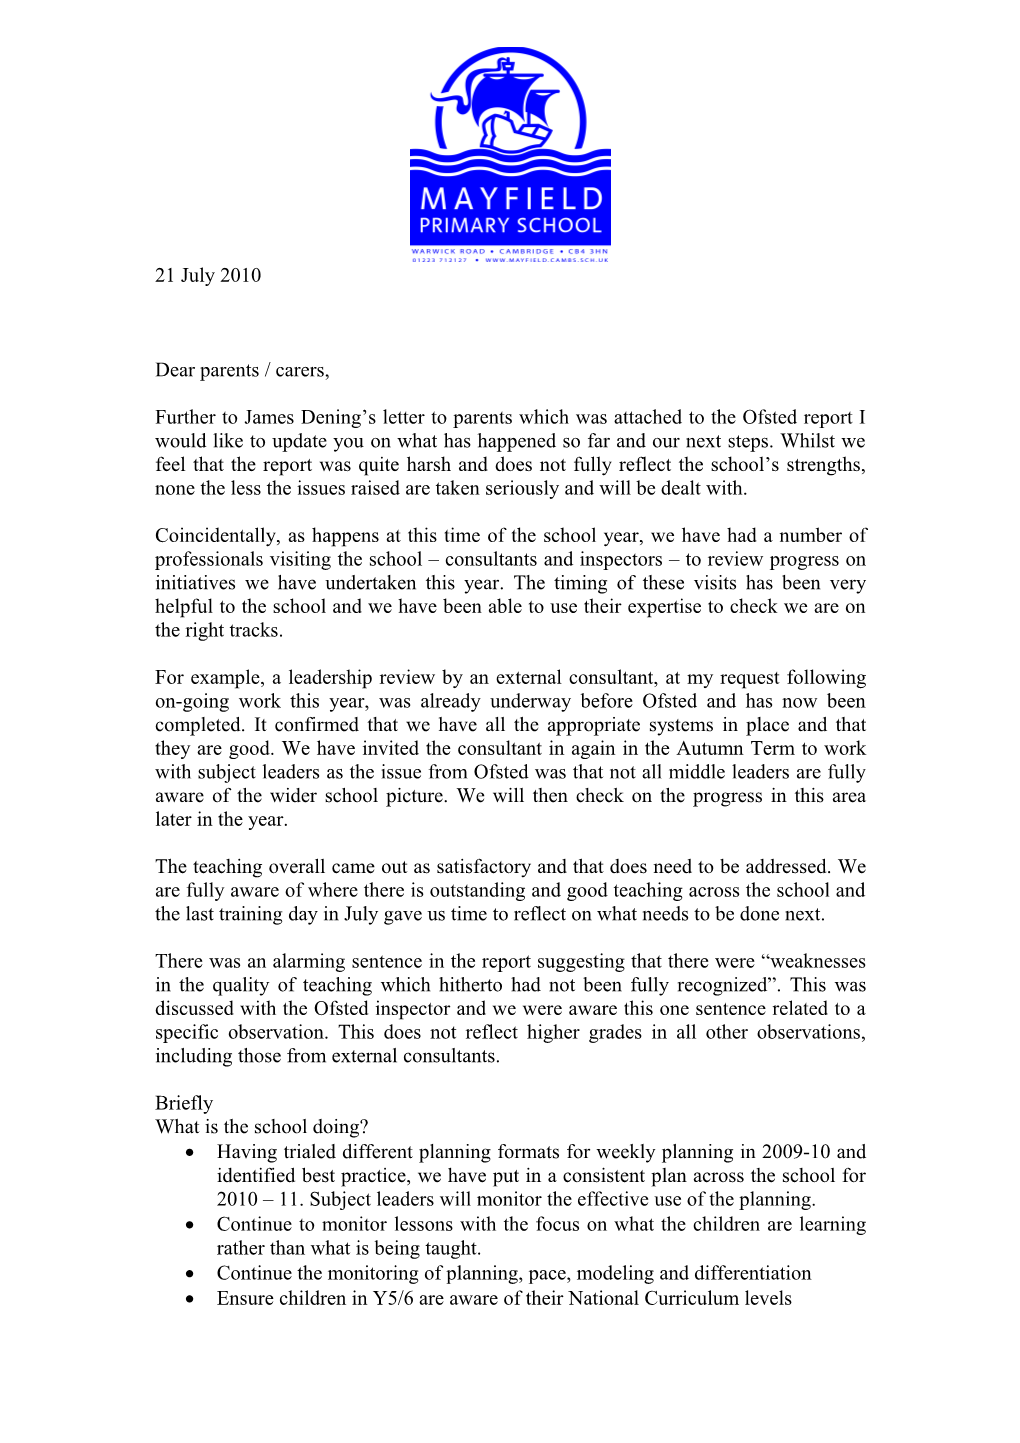 Ofsted Letter to Parents